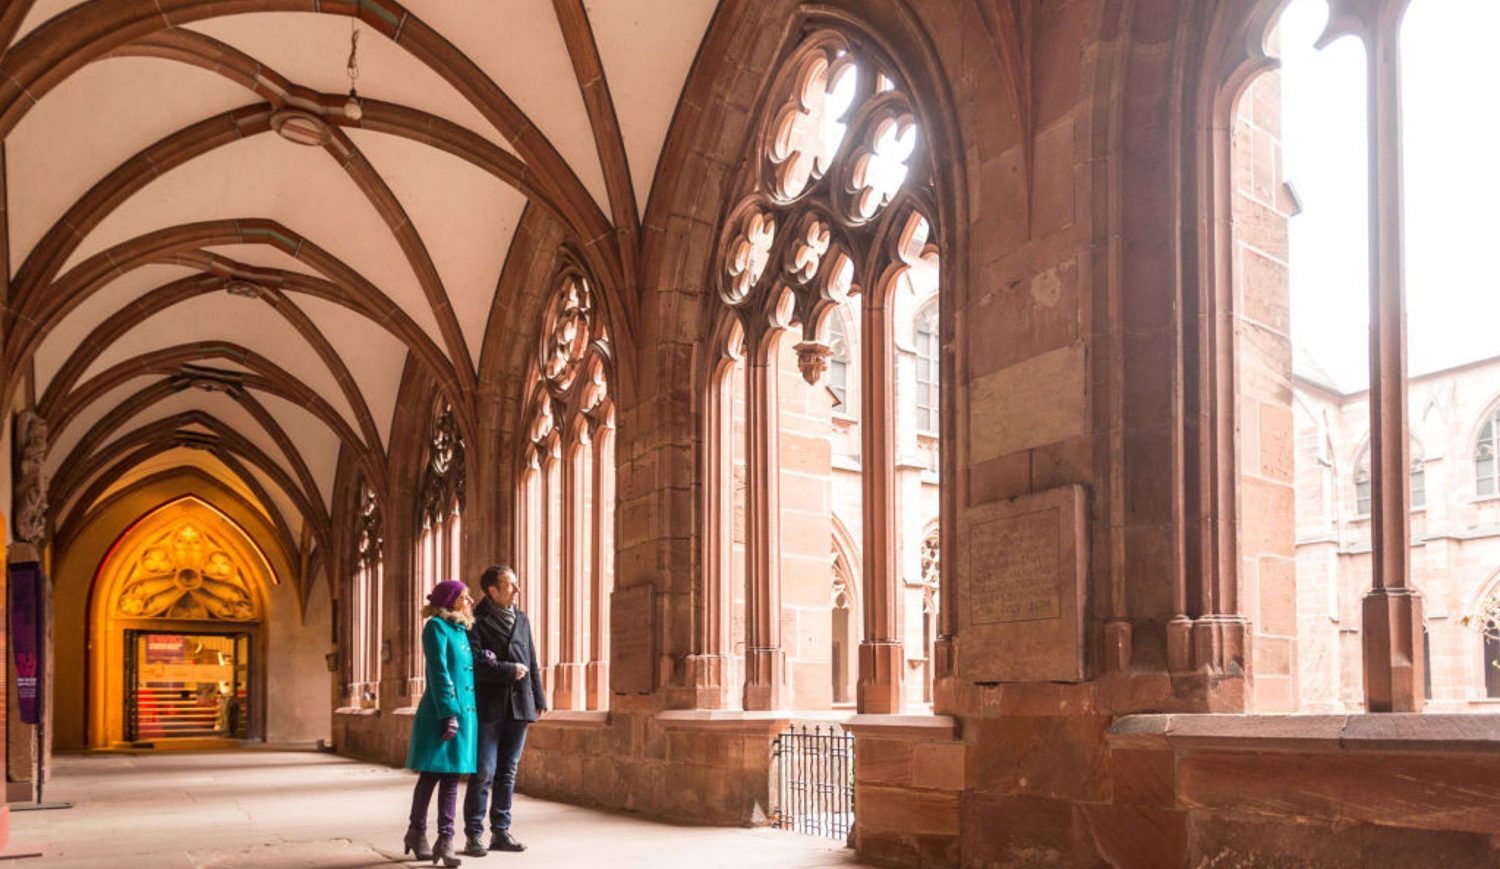 Walk through the cloister near the Mainz Cathedral